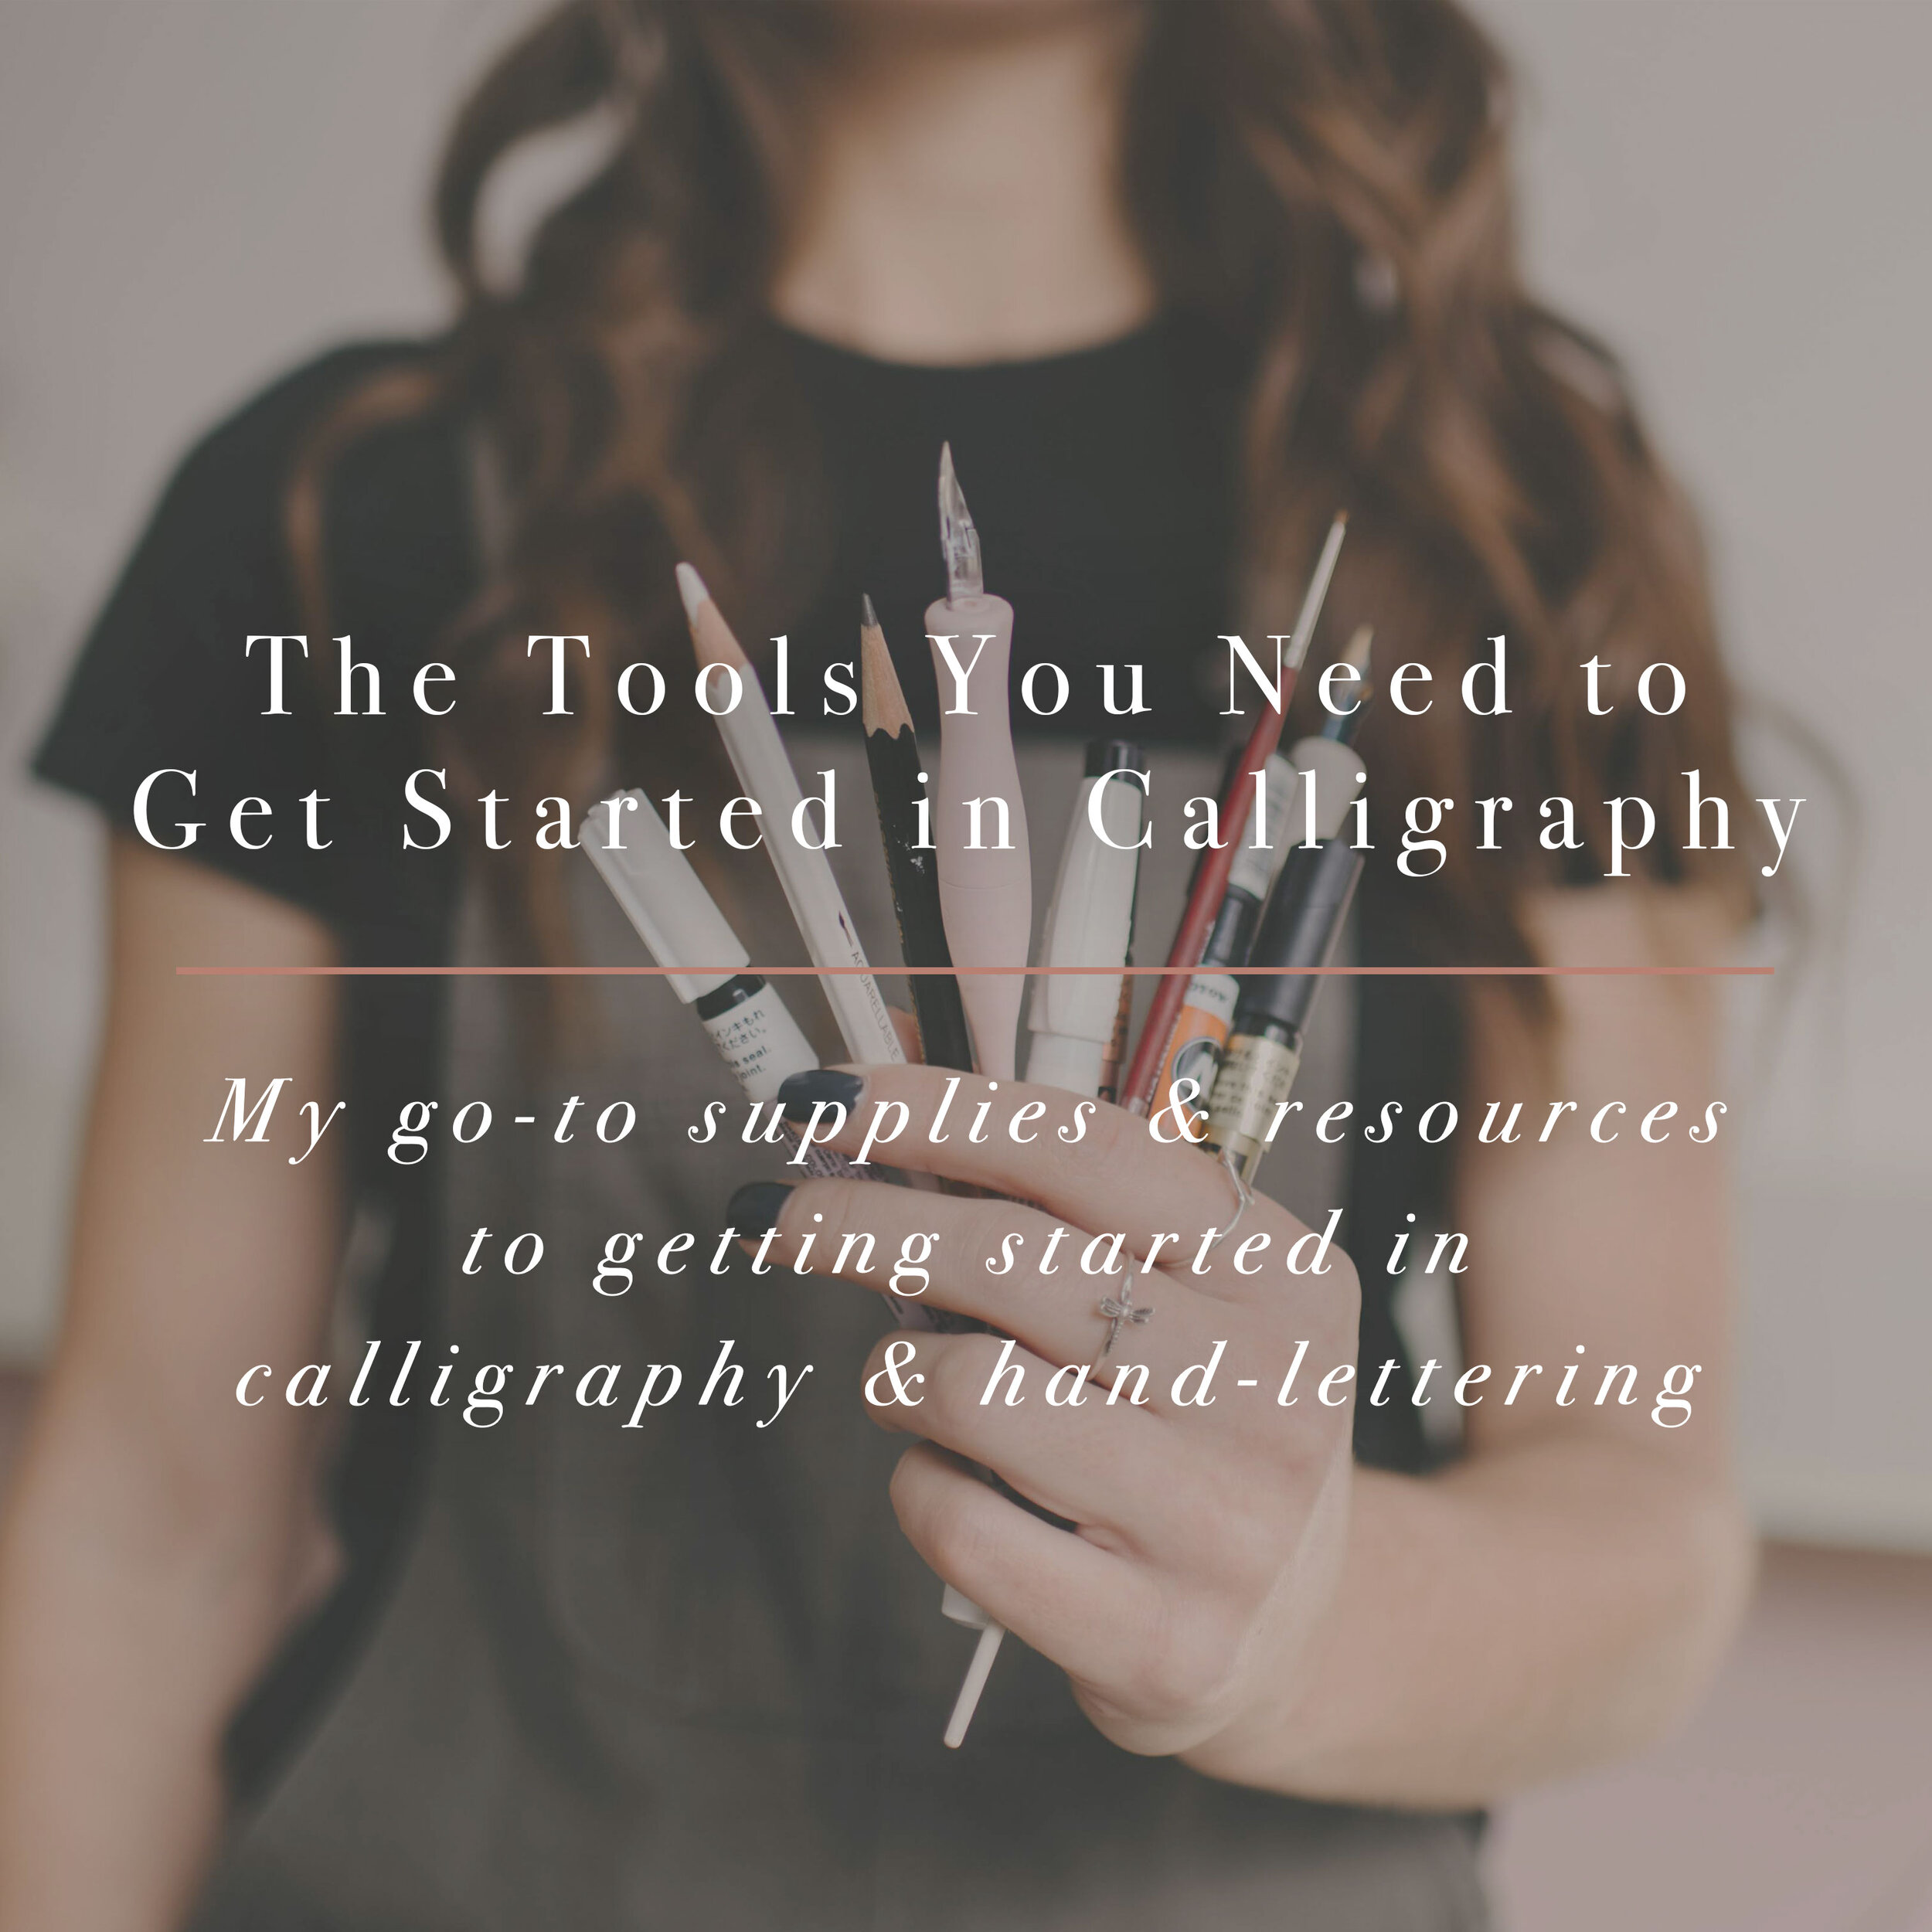 The Tools You Need to Get Started in Calligraphy